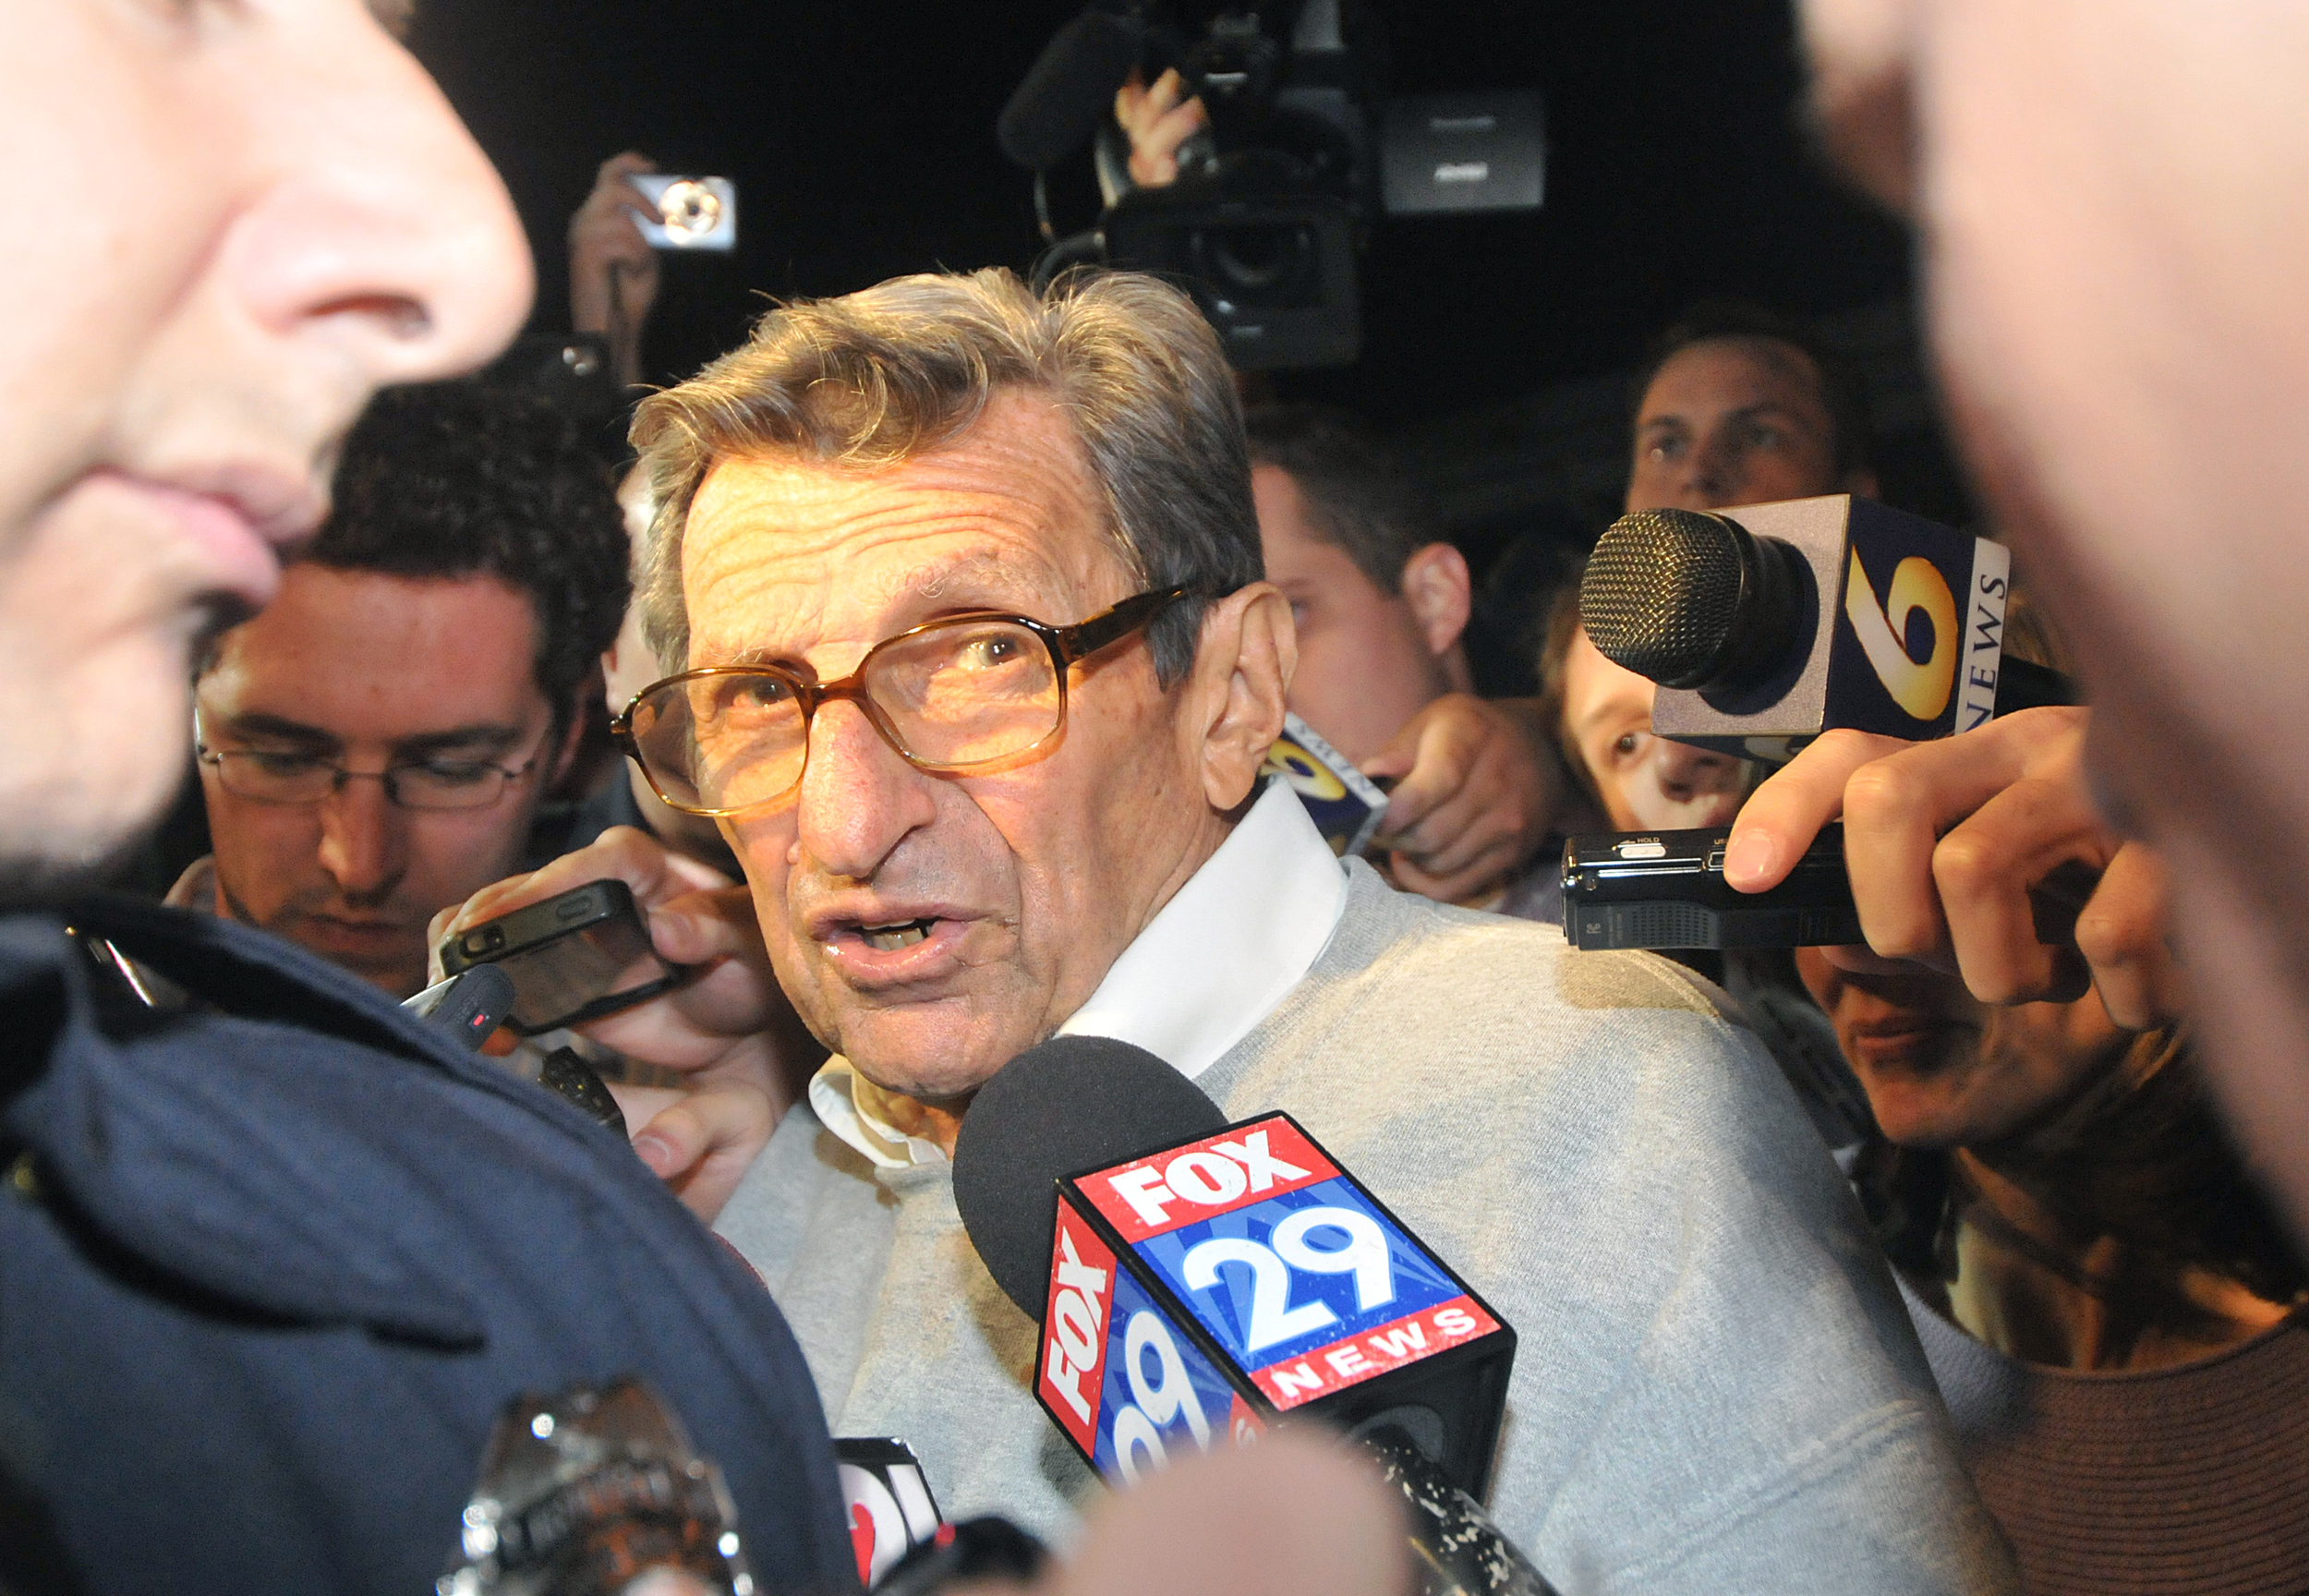  Head coach Joe Paterno speaks outside of his home in State College on Tuesday night to members of the media. A group of around 300 students gathered in support of Paterno, held signs, and sang the Alma Mater. 